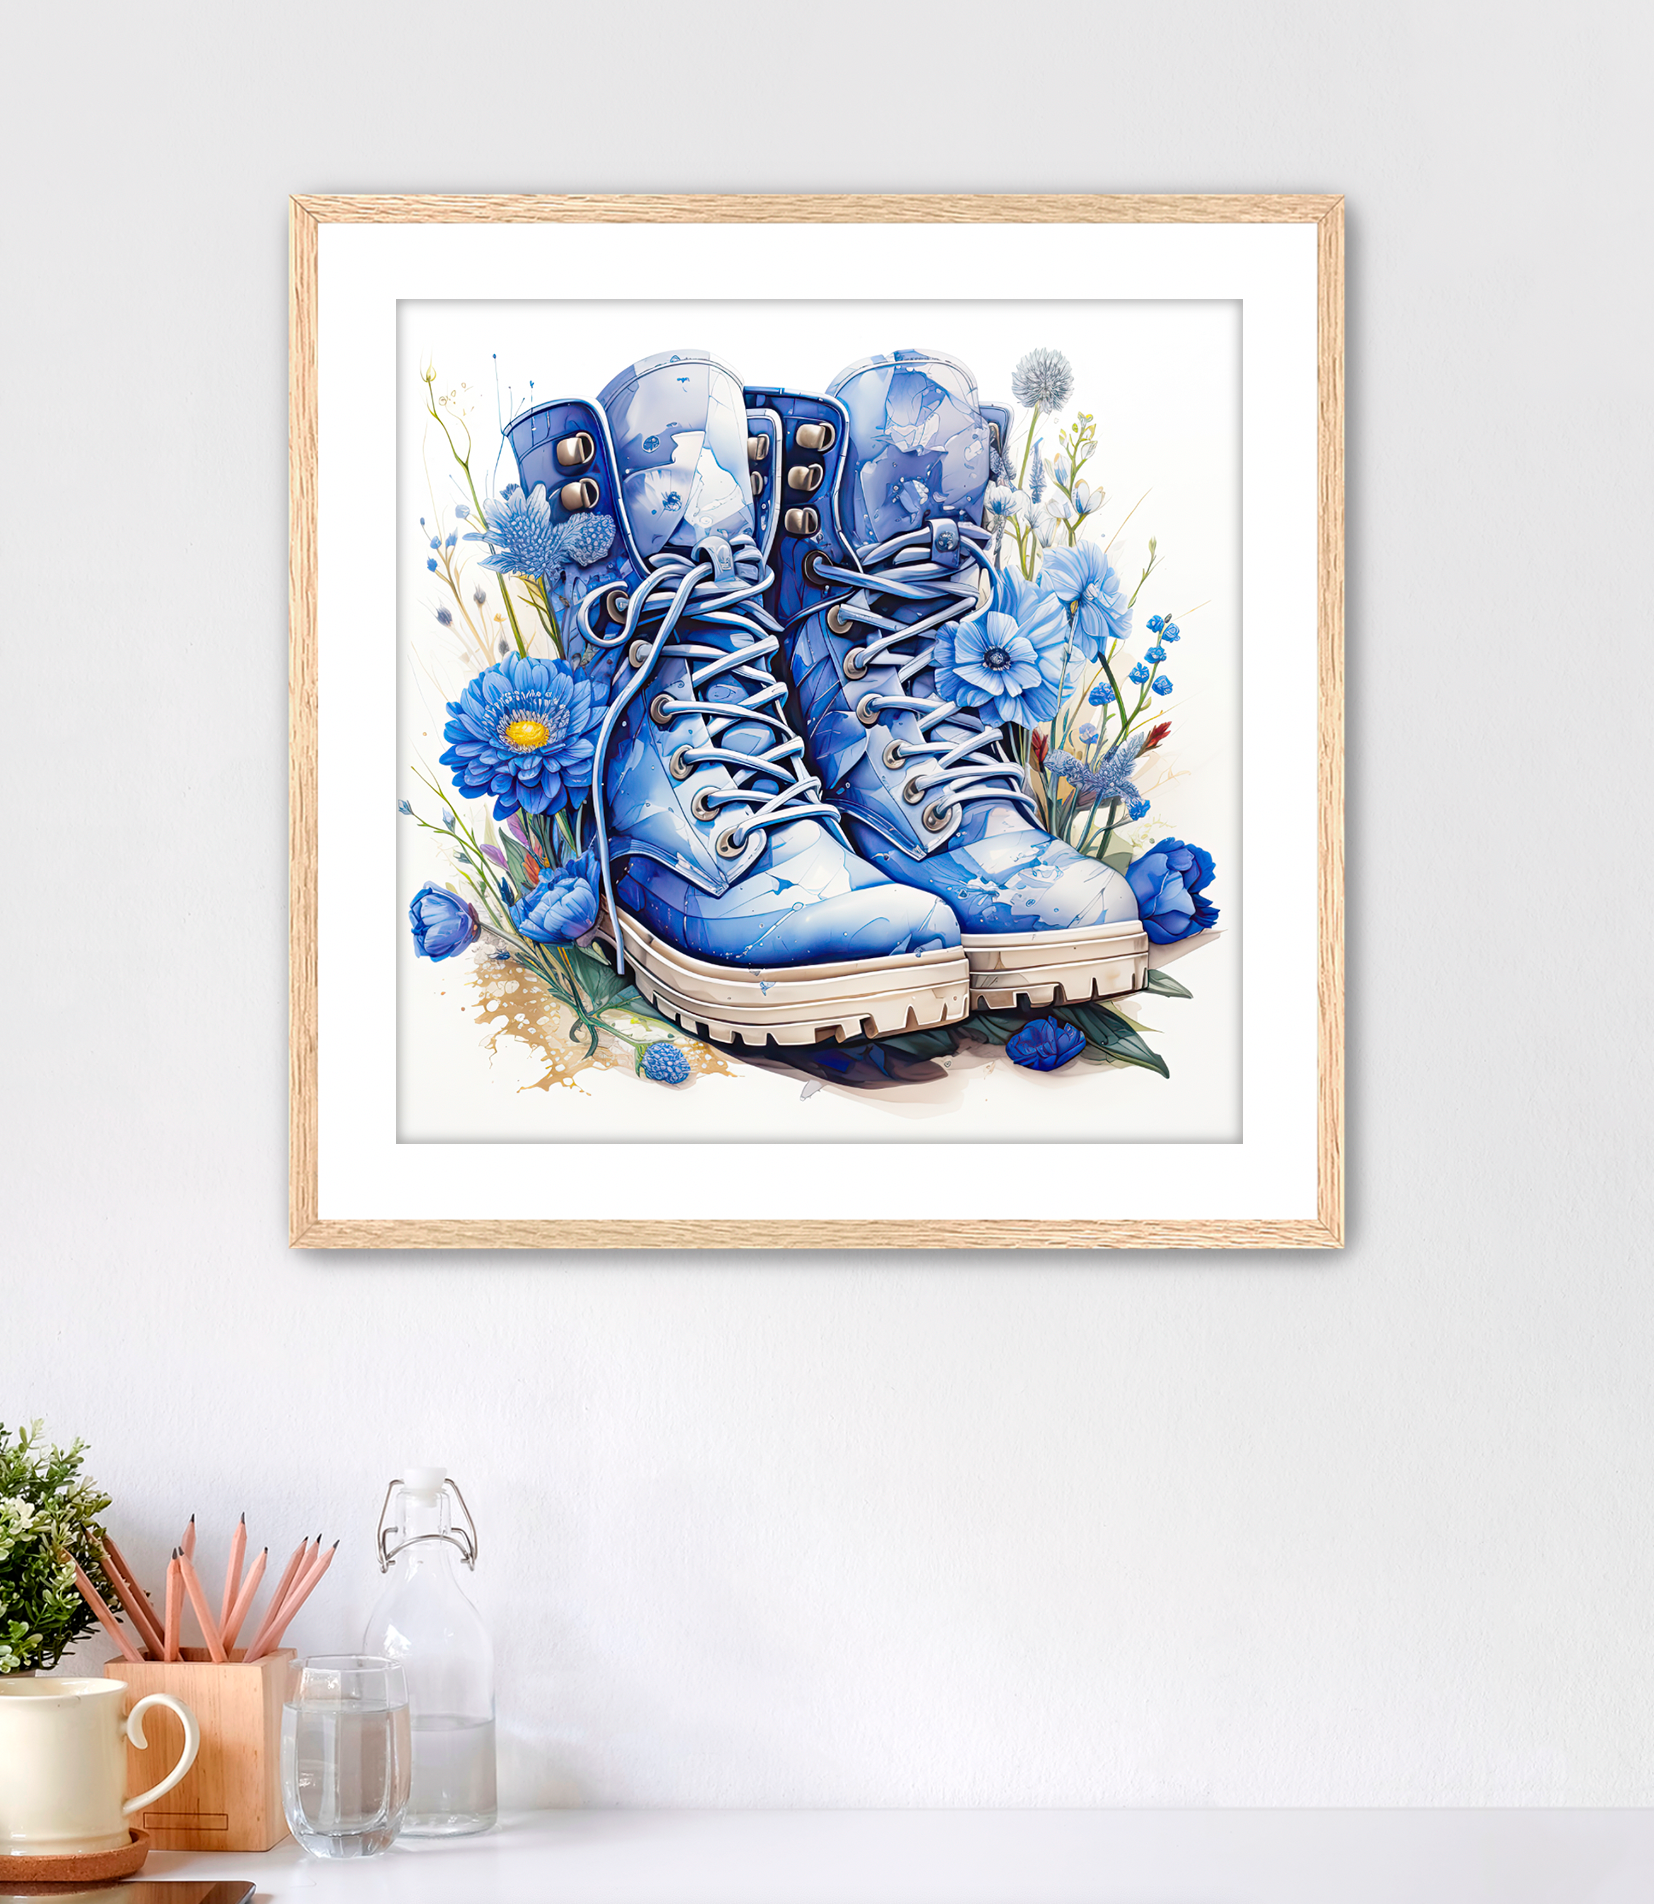 Adorable Framed Fine Art Print. The artwork features watercolor style blue hiking boots surrounded in blue wildflowers. A great gift for women hiking or gardening enthusiasts. Art comes with white mat and oak frame. This wall art is for sale at customconcepts.art